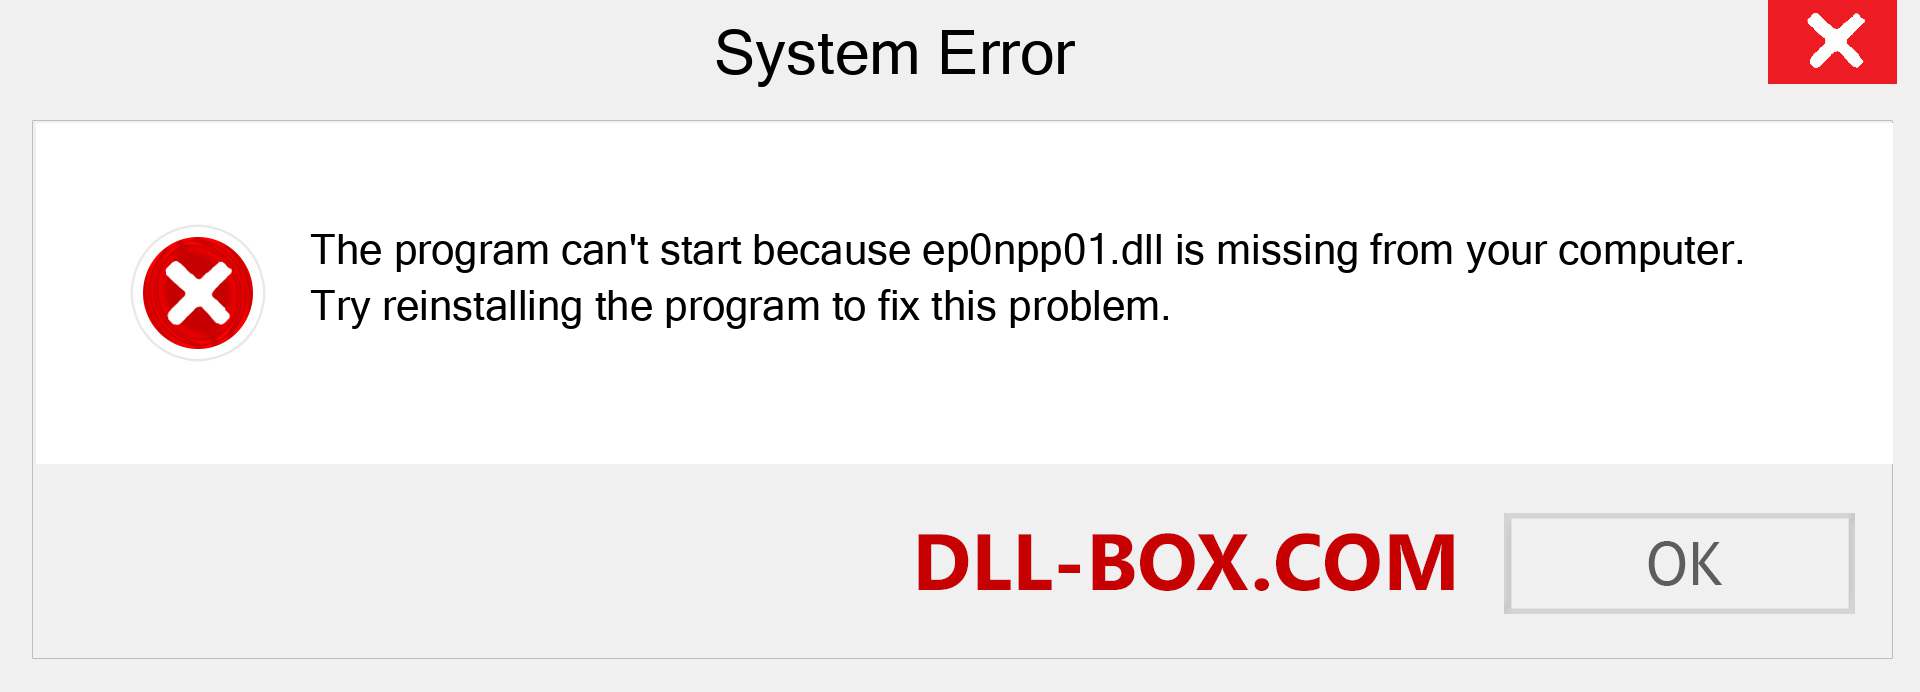  ep0npp01.dll file is missing?. Download for Windows 7, 8, 10 - Fix  ep0npp01 dll Missing Error on Windows, photos, images